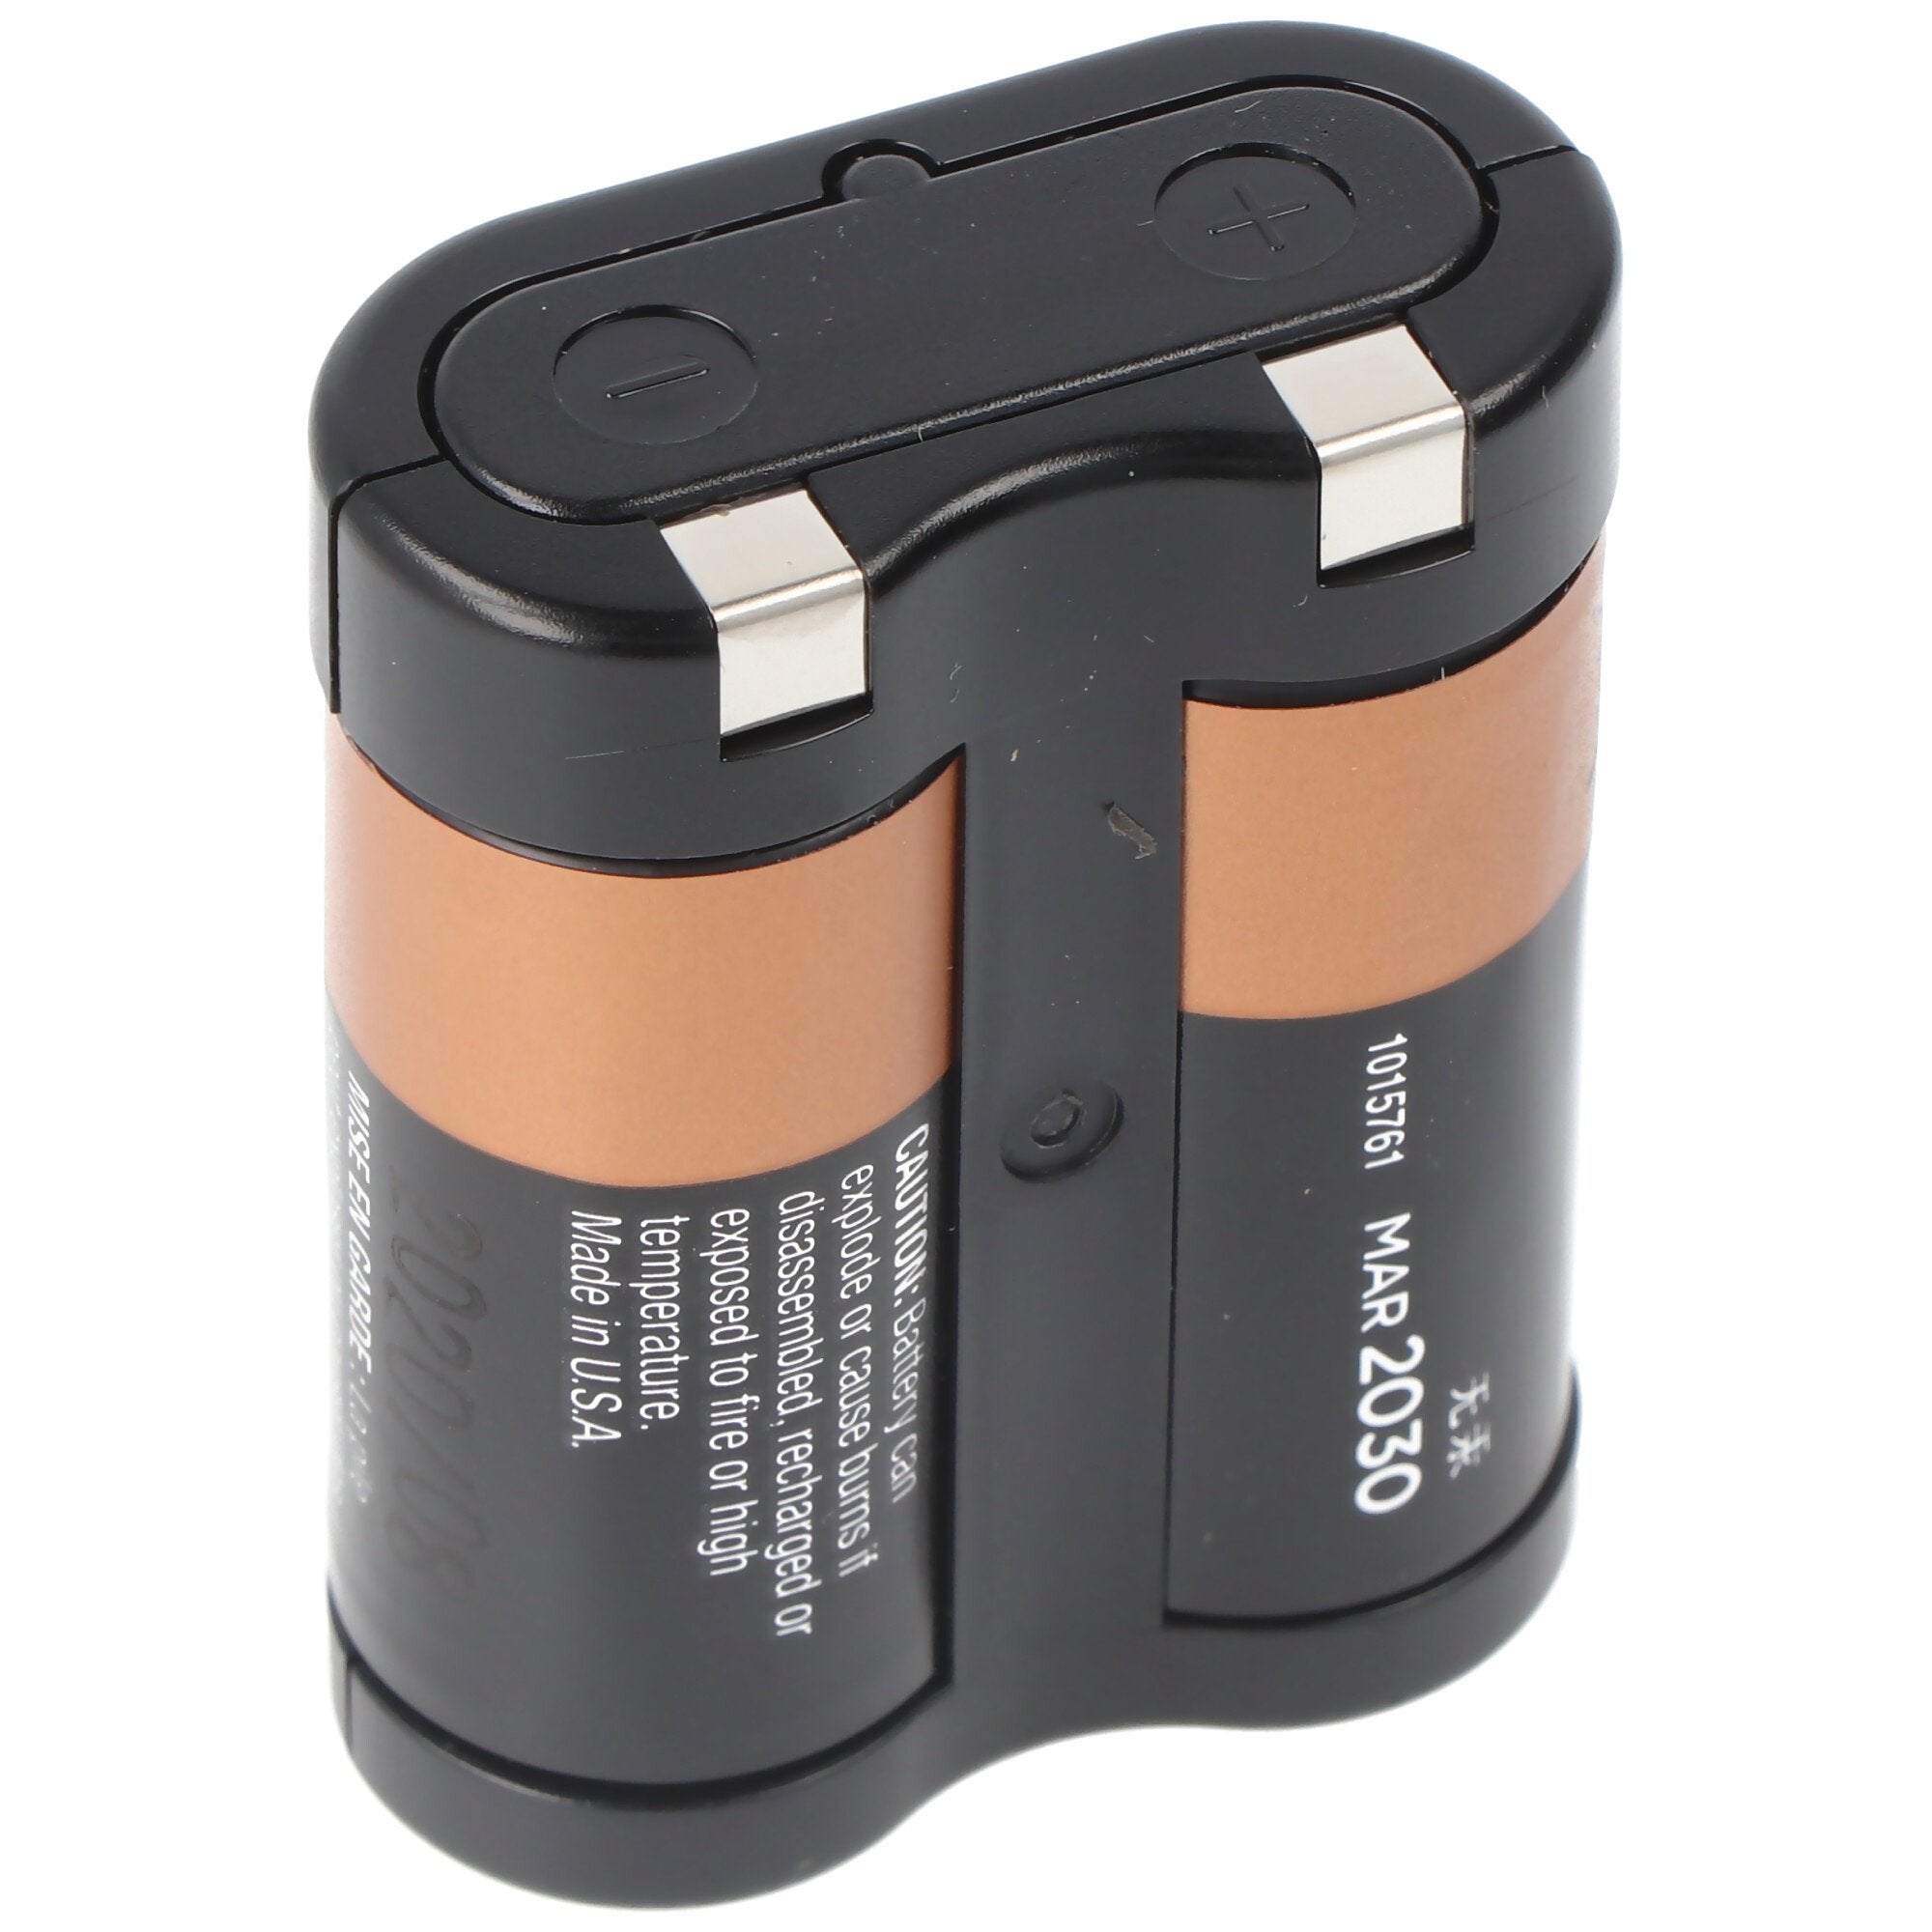 Duracell photo battery 2CR5 Ultra Lithium 6 volt with 1400mAh single blister